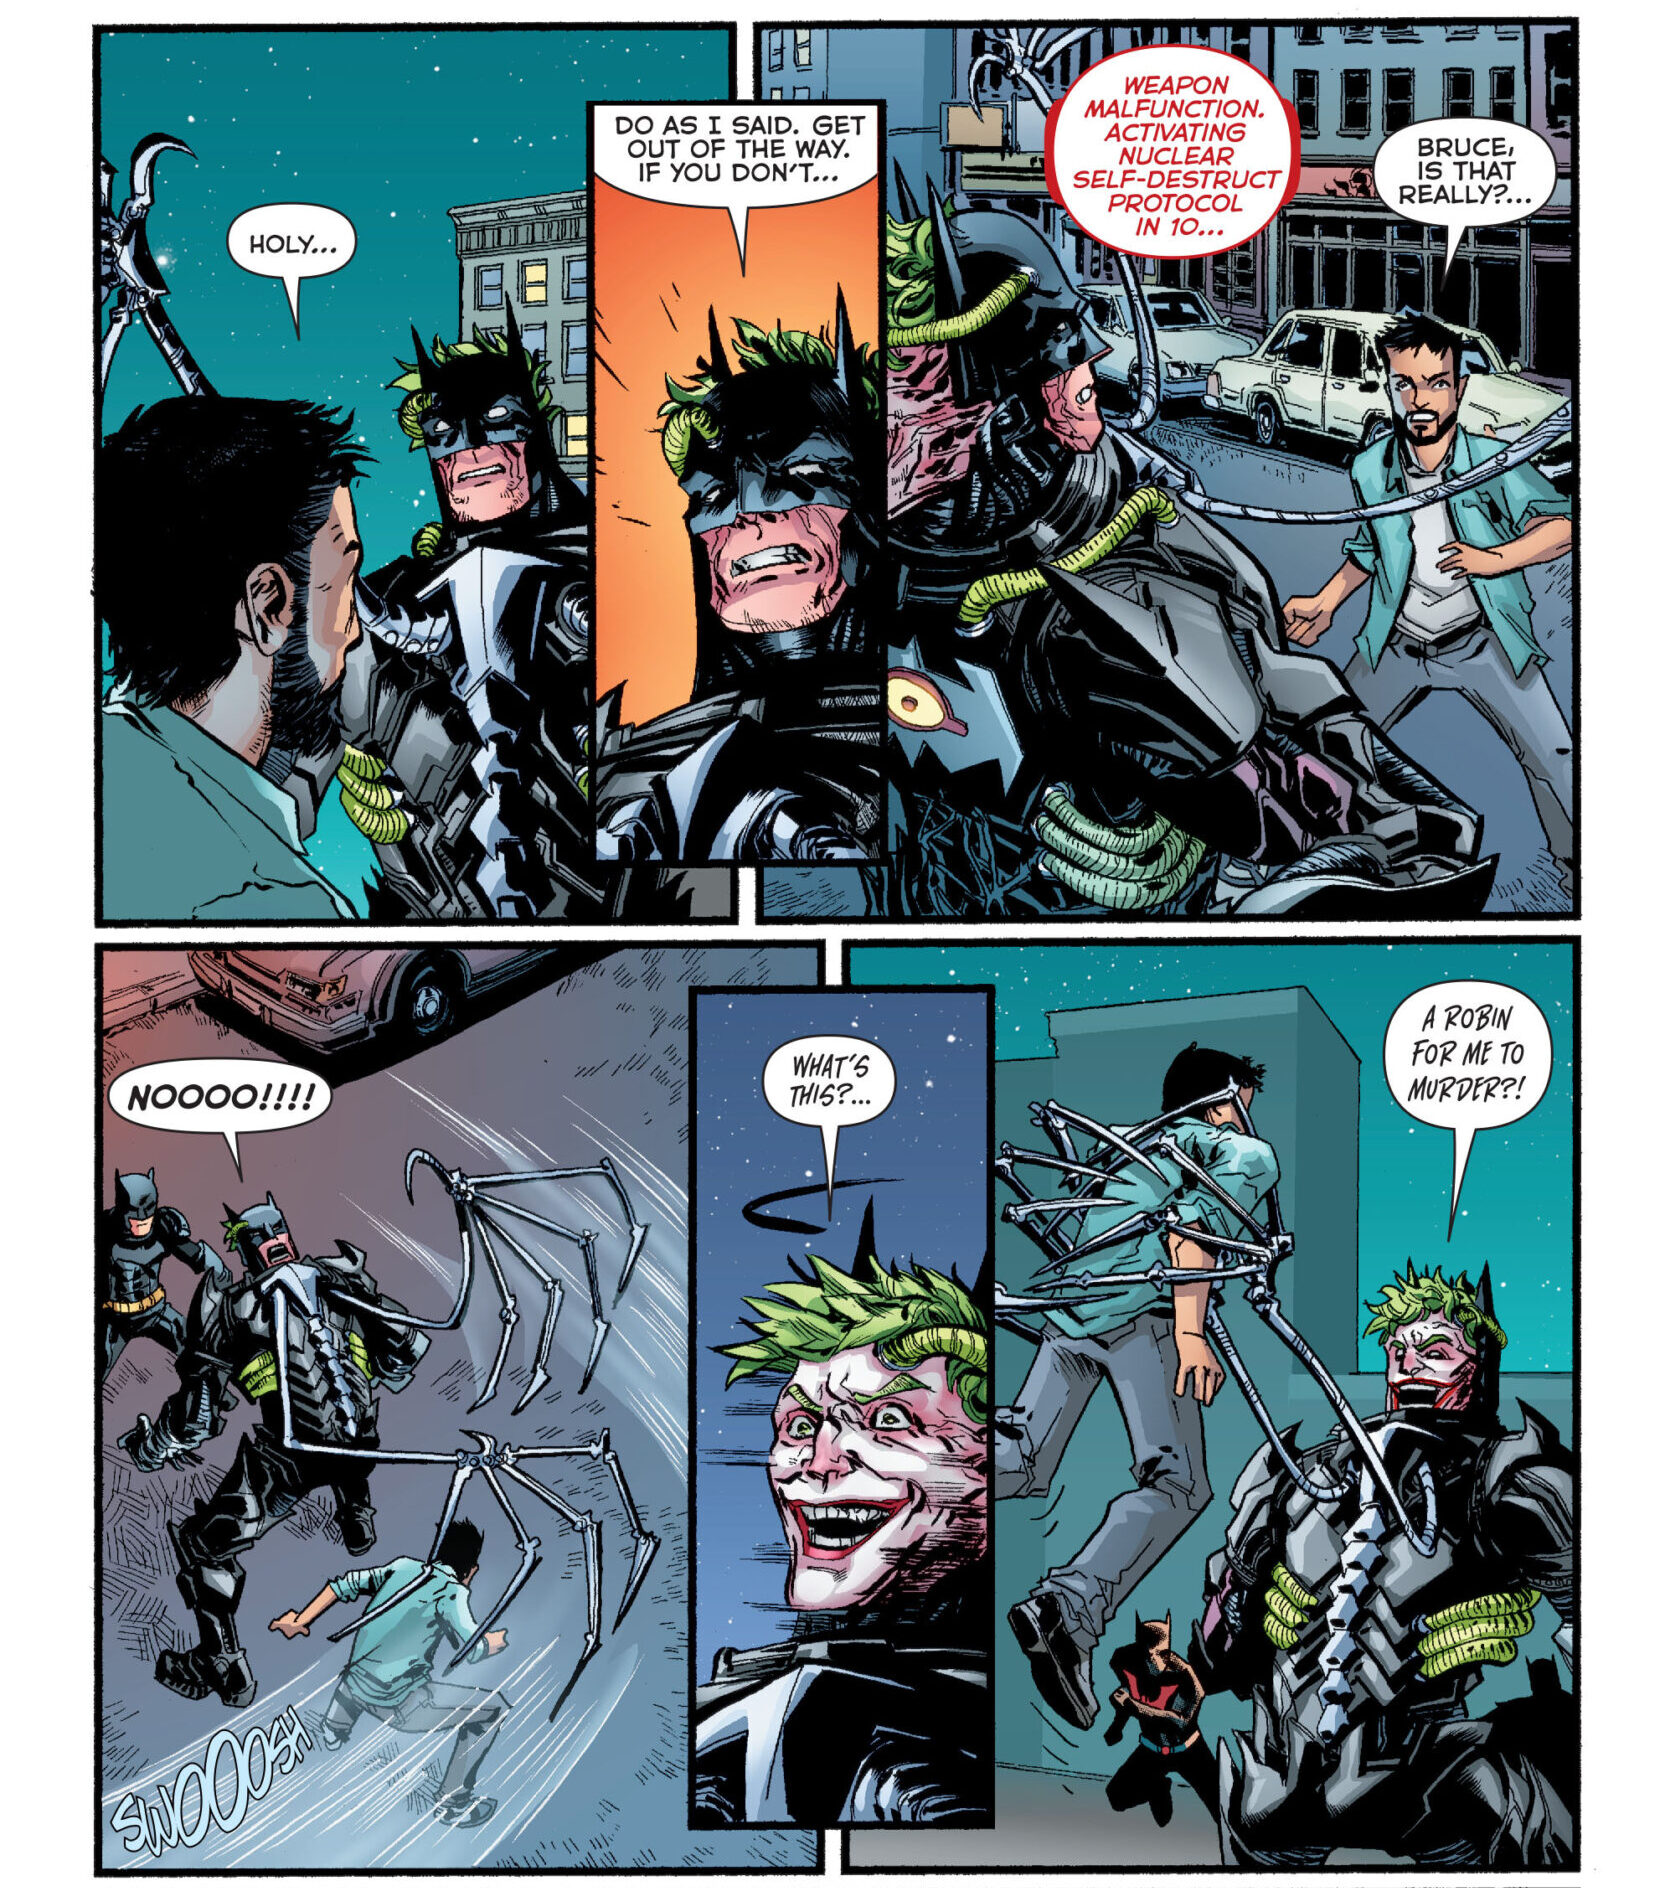 The Batman-Joker hybrid sets its sights on Tim Drake in The New 52: Futures End Vol. 1 38 "Chapter 38" (2015), DC